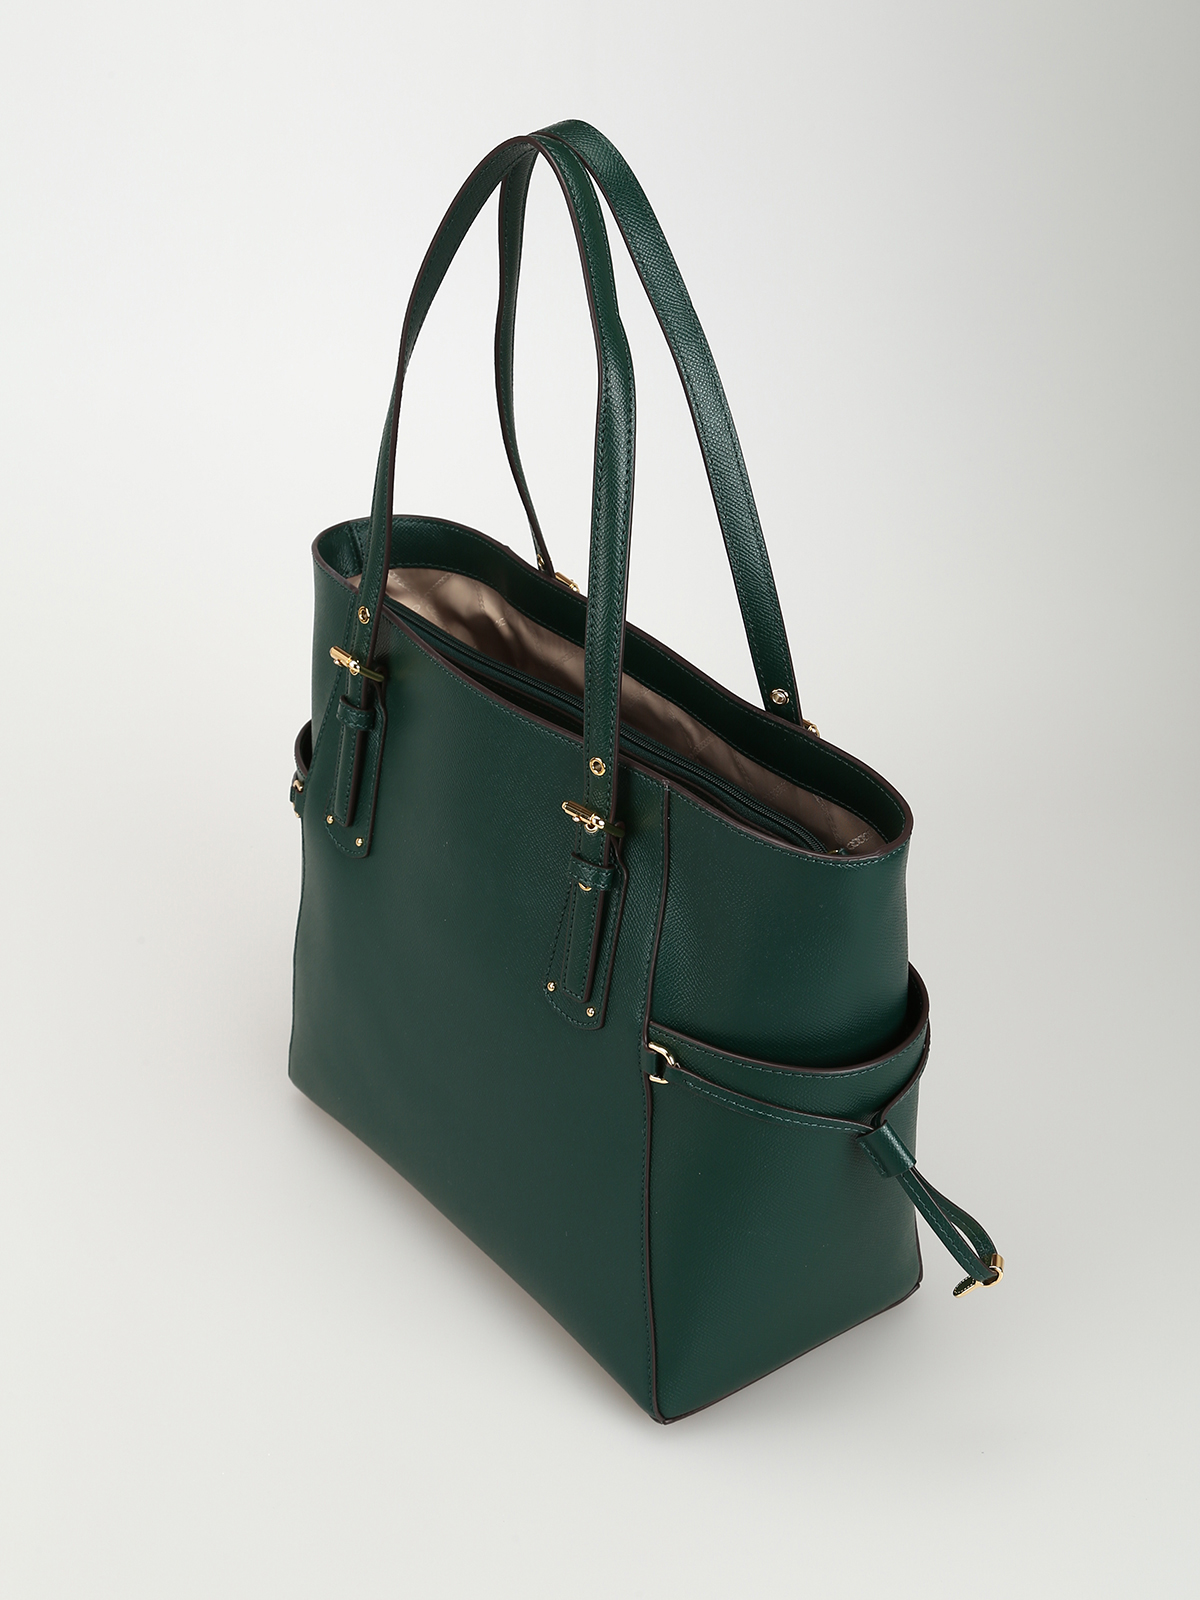 Totes bags Michael Kors - Voyager S dark green grainy leather bag -  30H7GV6T9L305